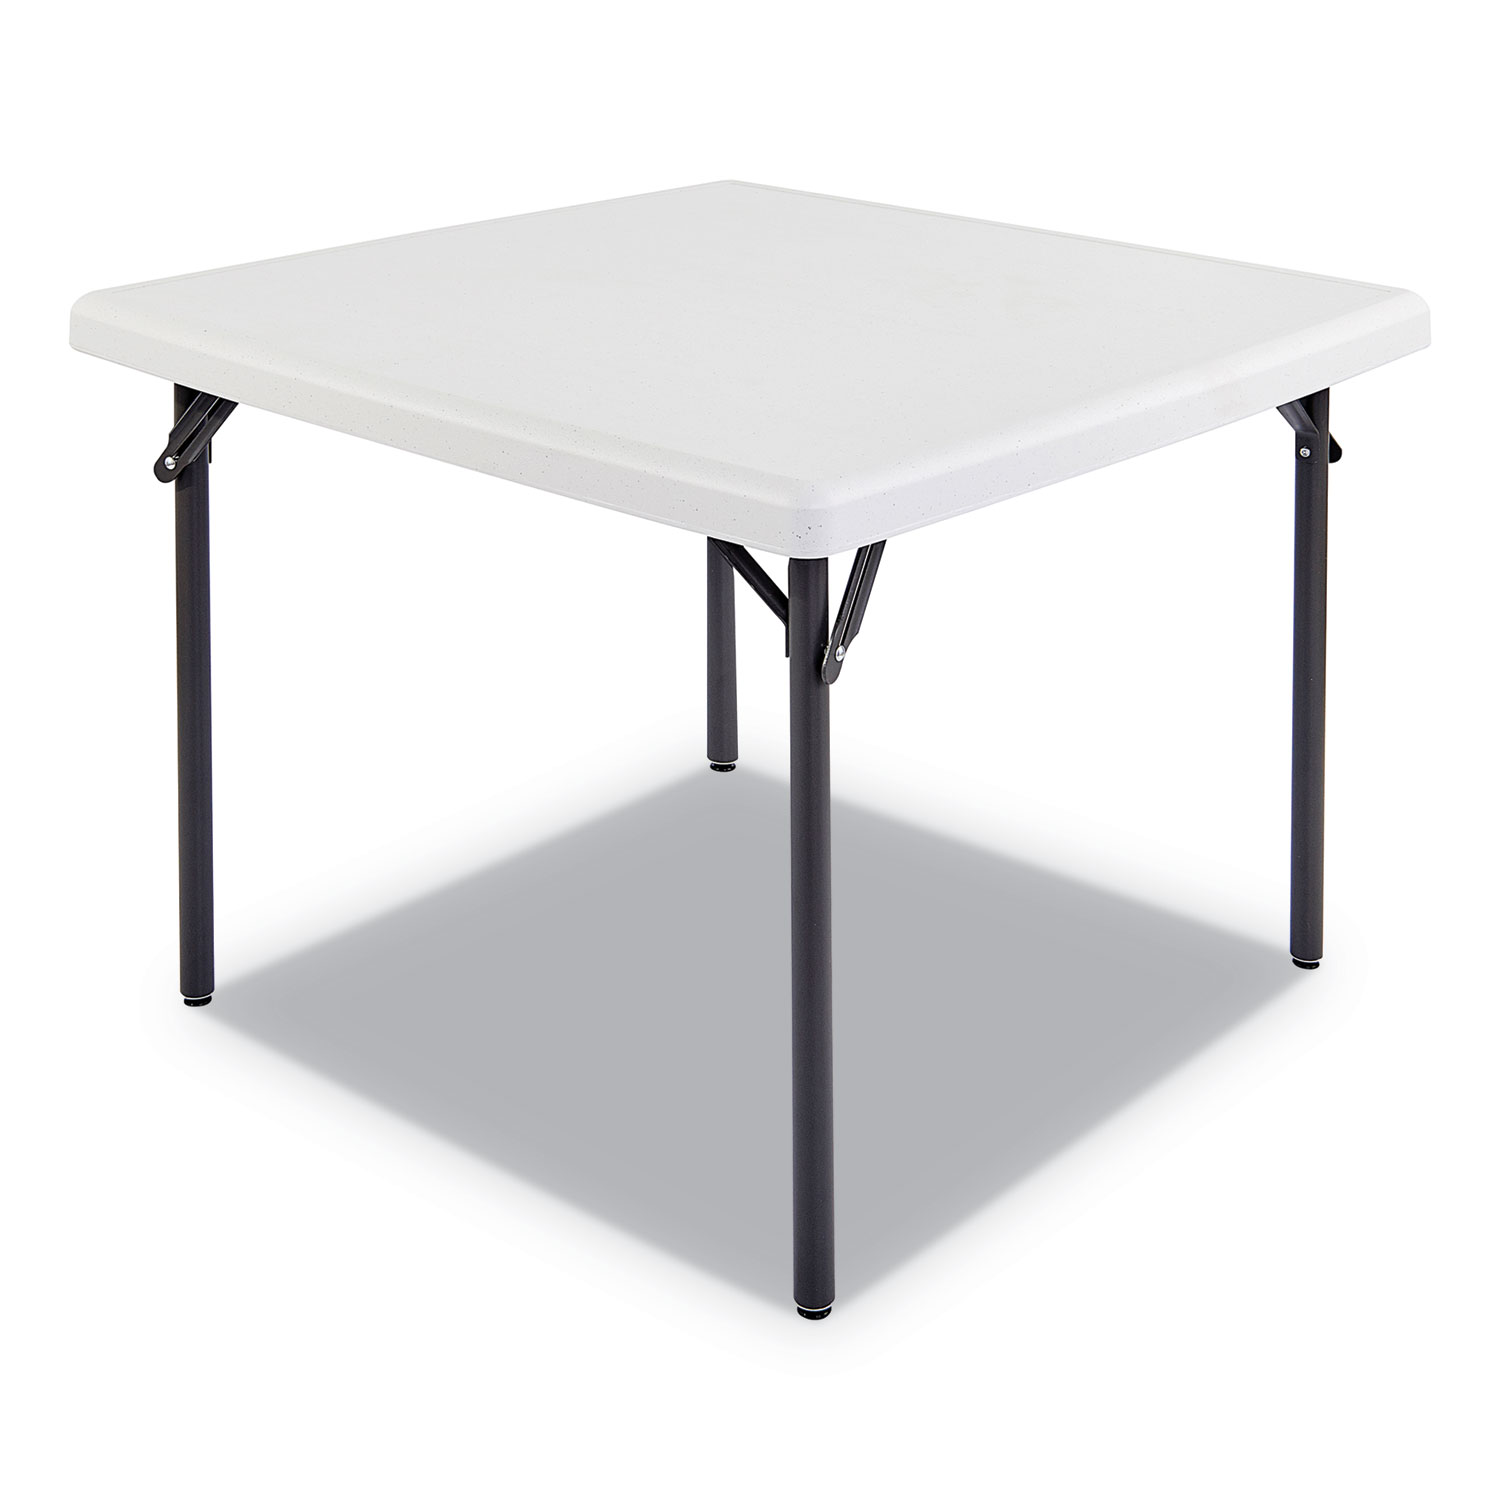  Iceberg 65273 IndestrucTables Too 1200 Series Folding Table, 37w x 37d x 29h, Platinum (ICE65273) 